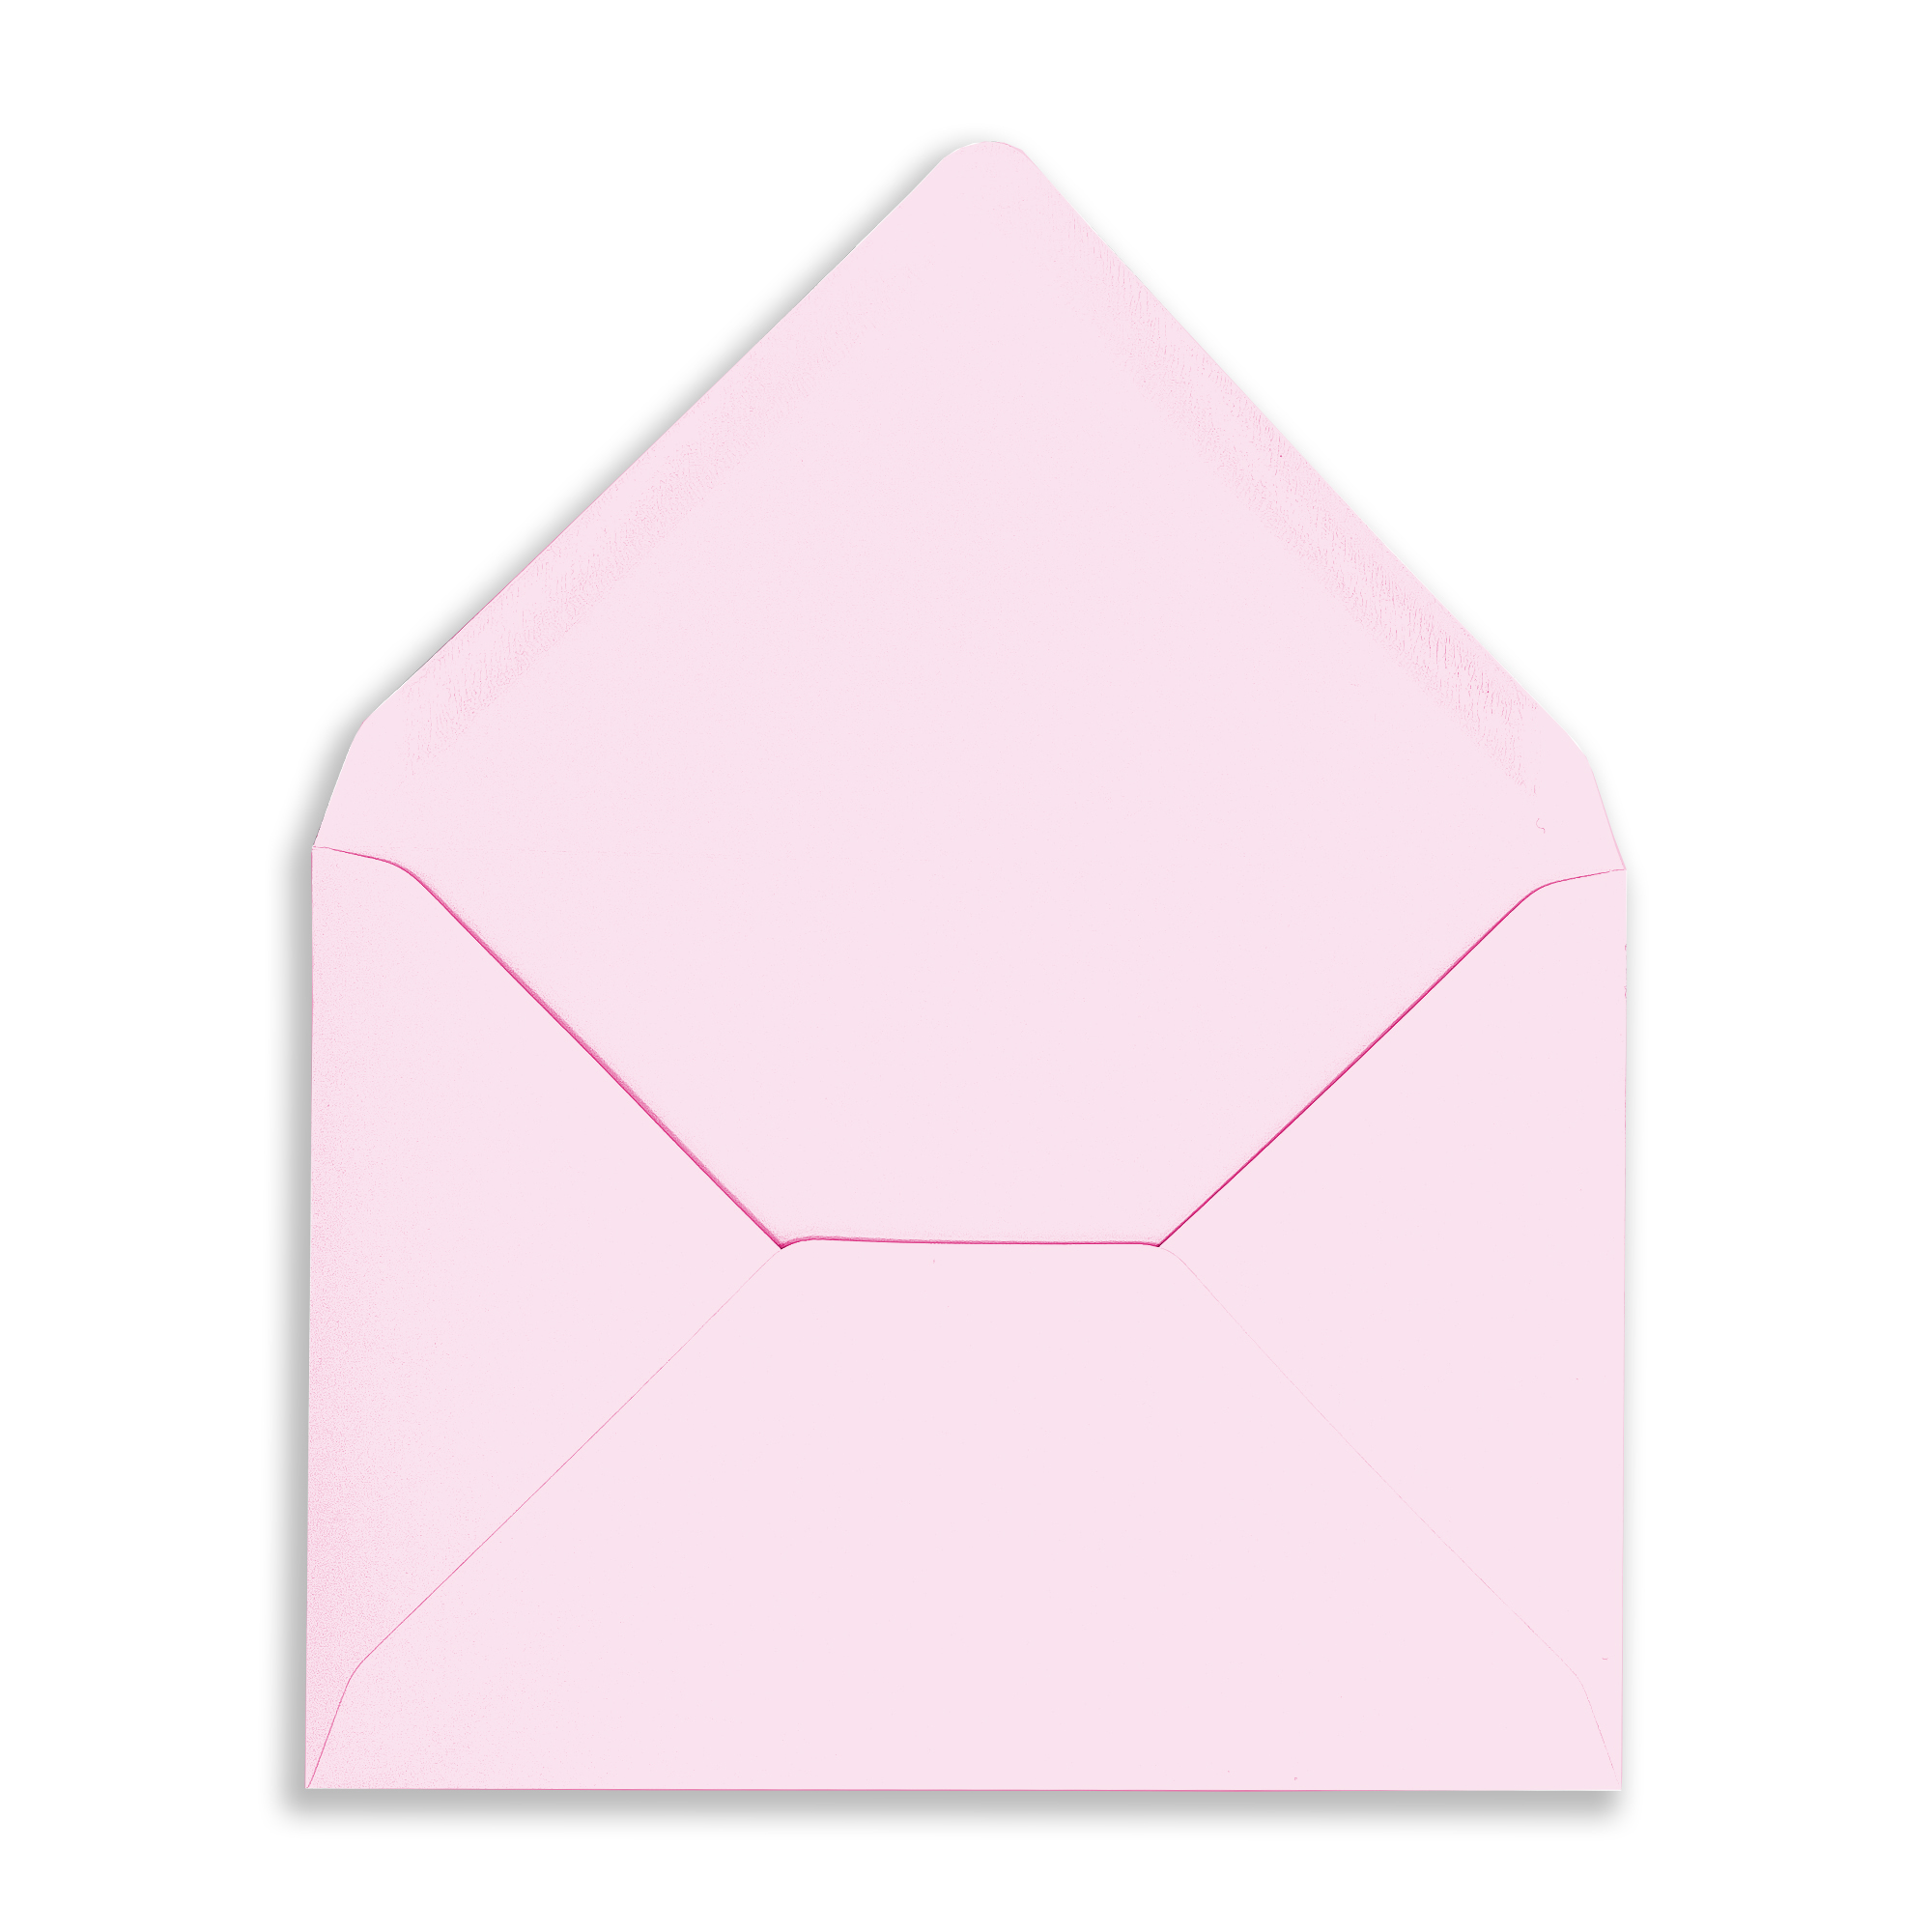 Candy_Floss_rec_Envelope_OpenFlap